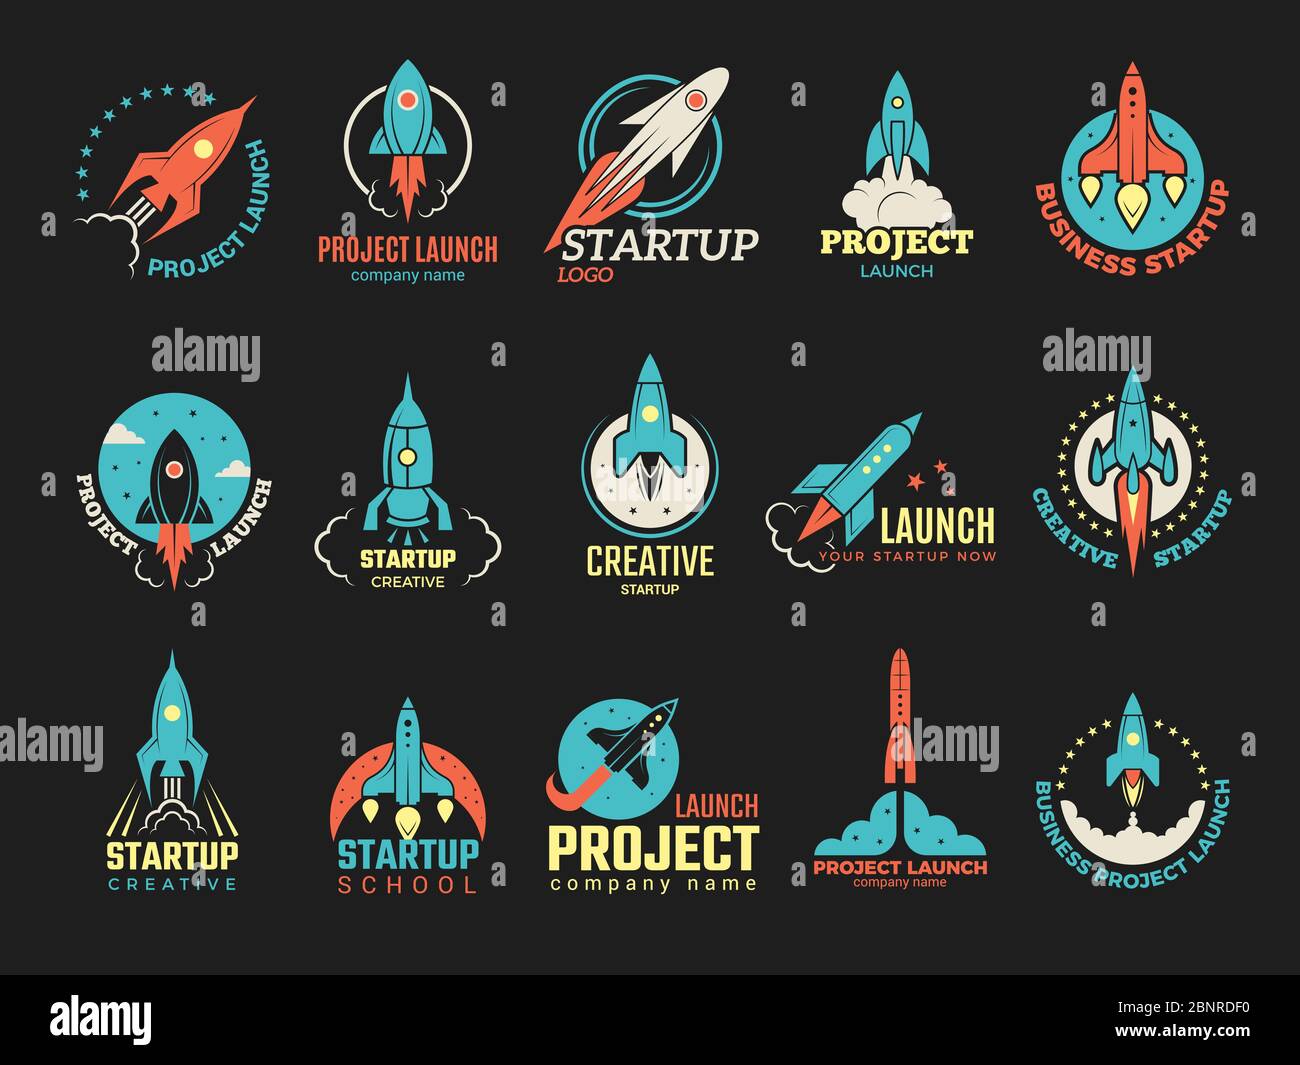 Startup logo. Business launch perfect idea spaceship rocket shuttle startup symbols vector colored badges Stock Vector